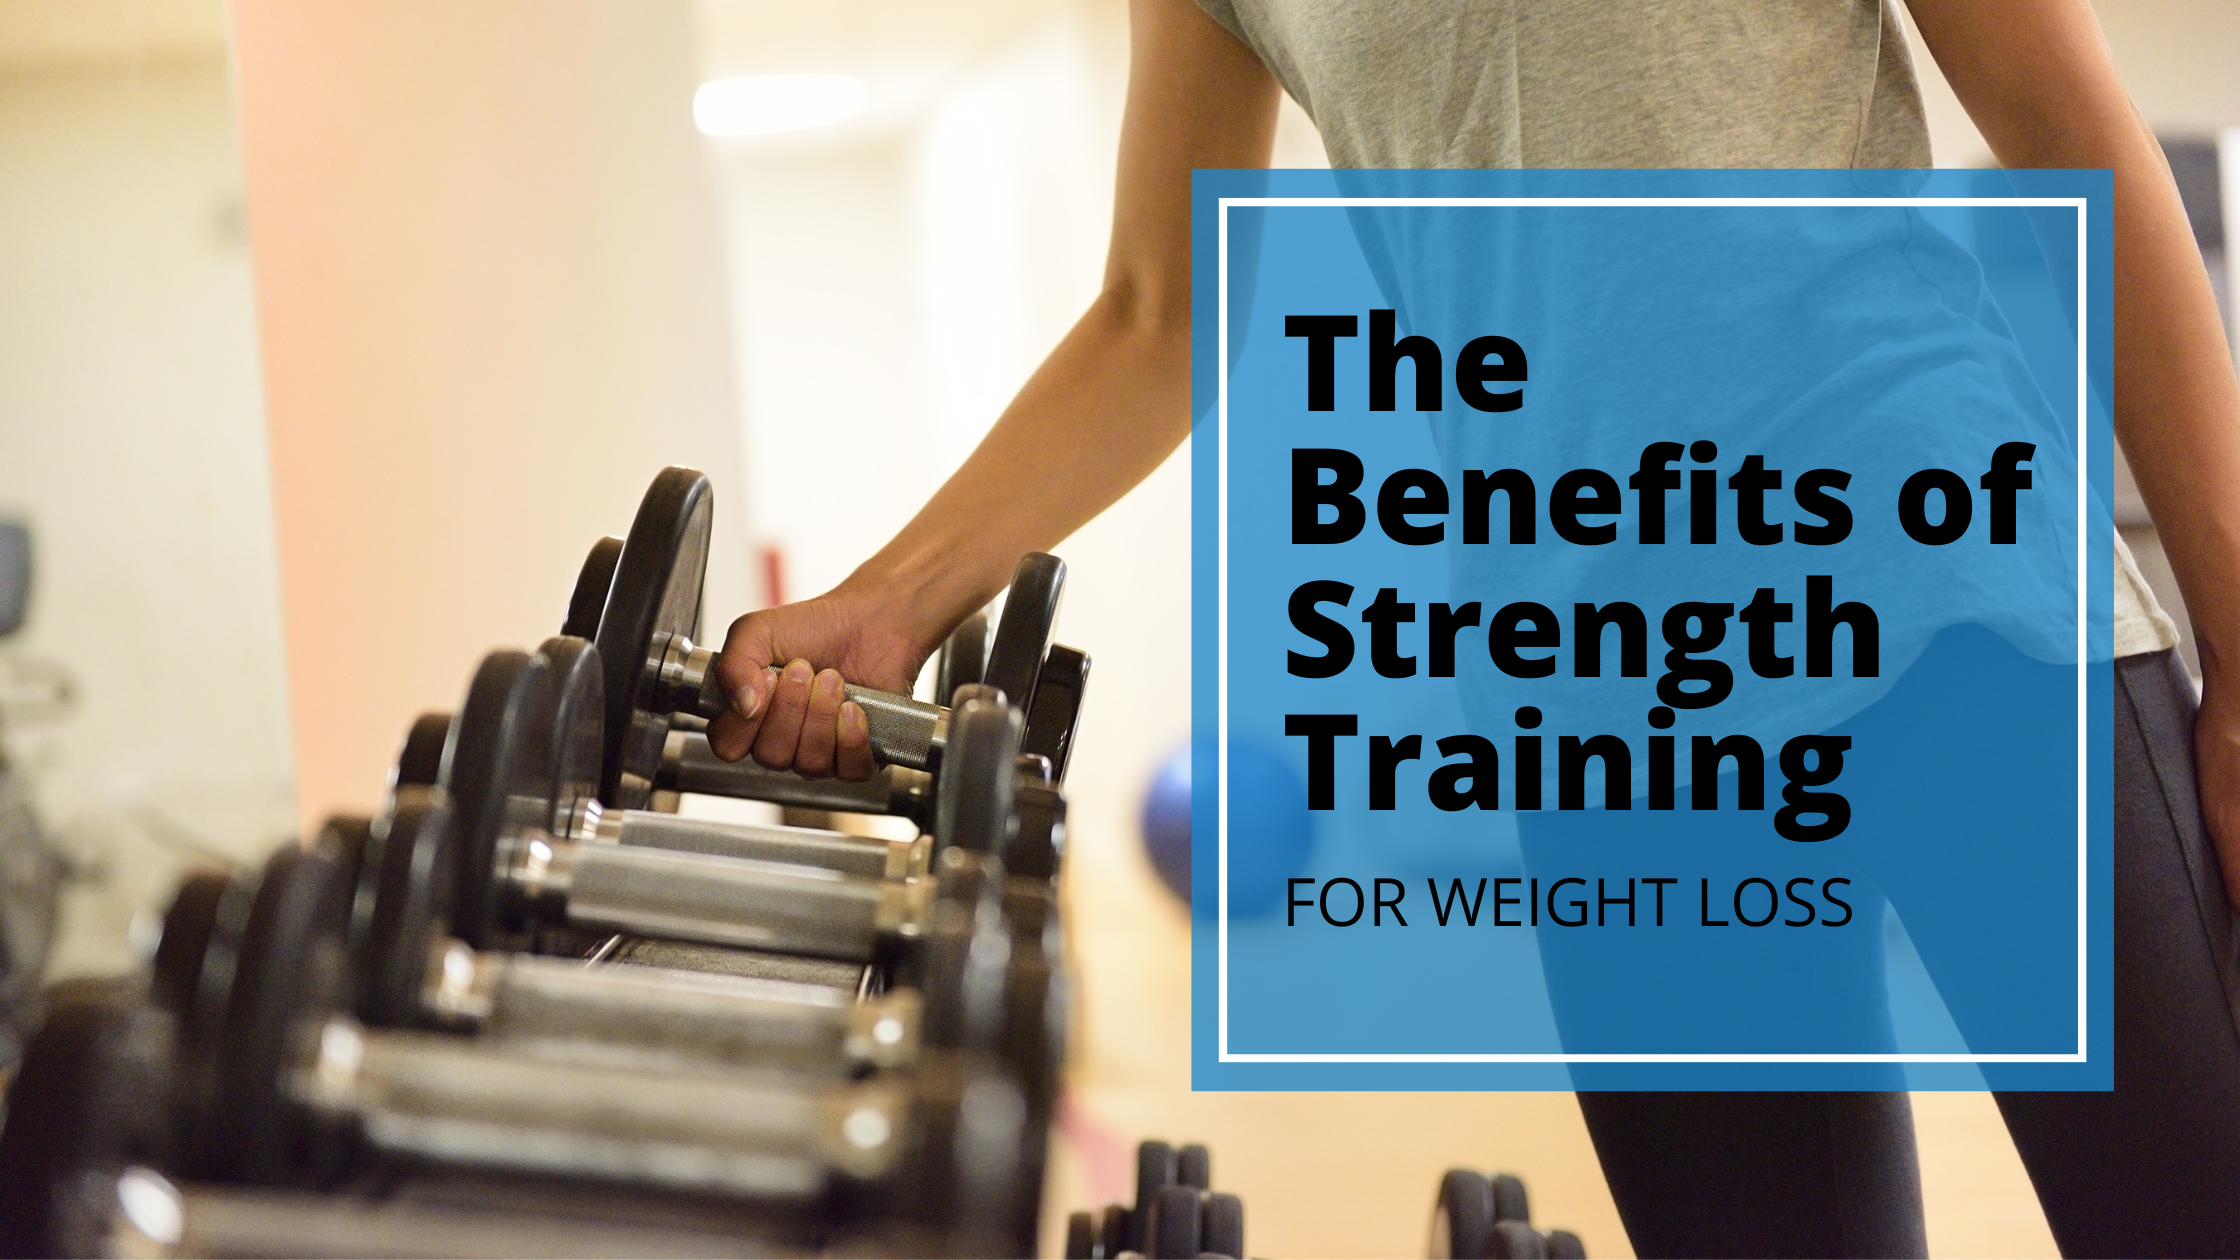 The Benefits of Strength Training for Weight Loss